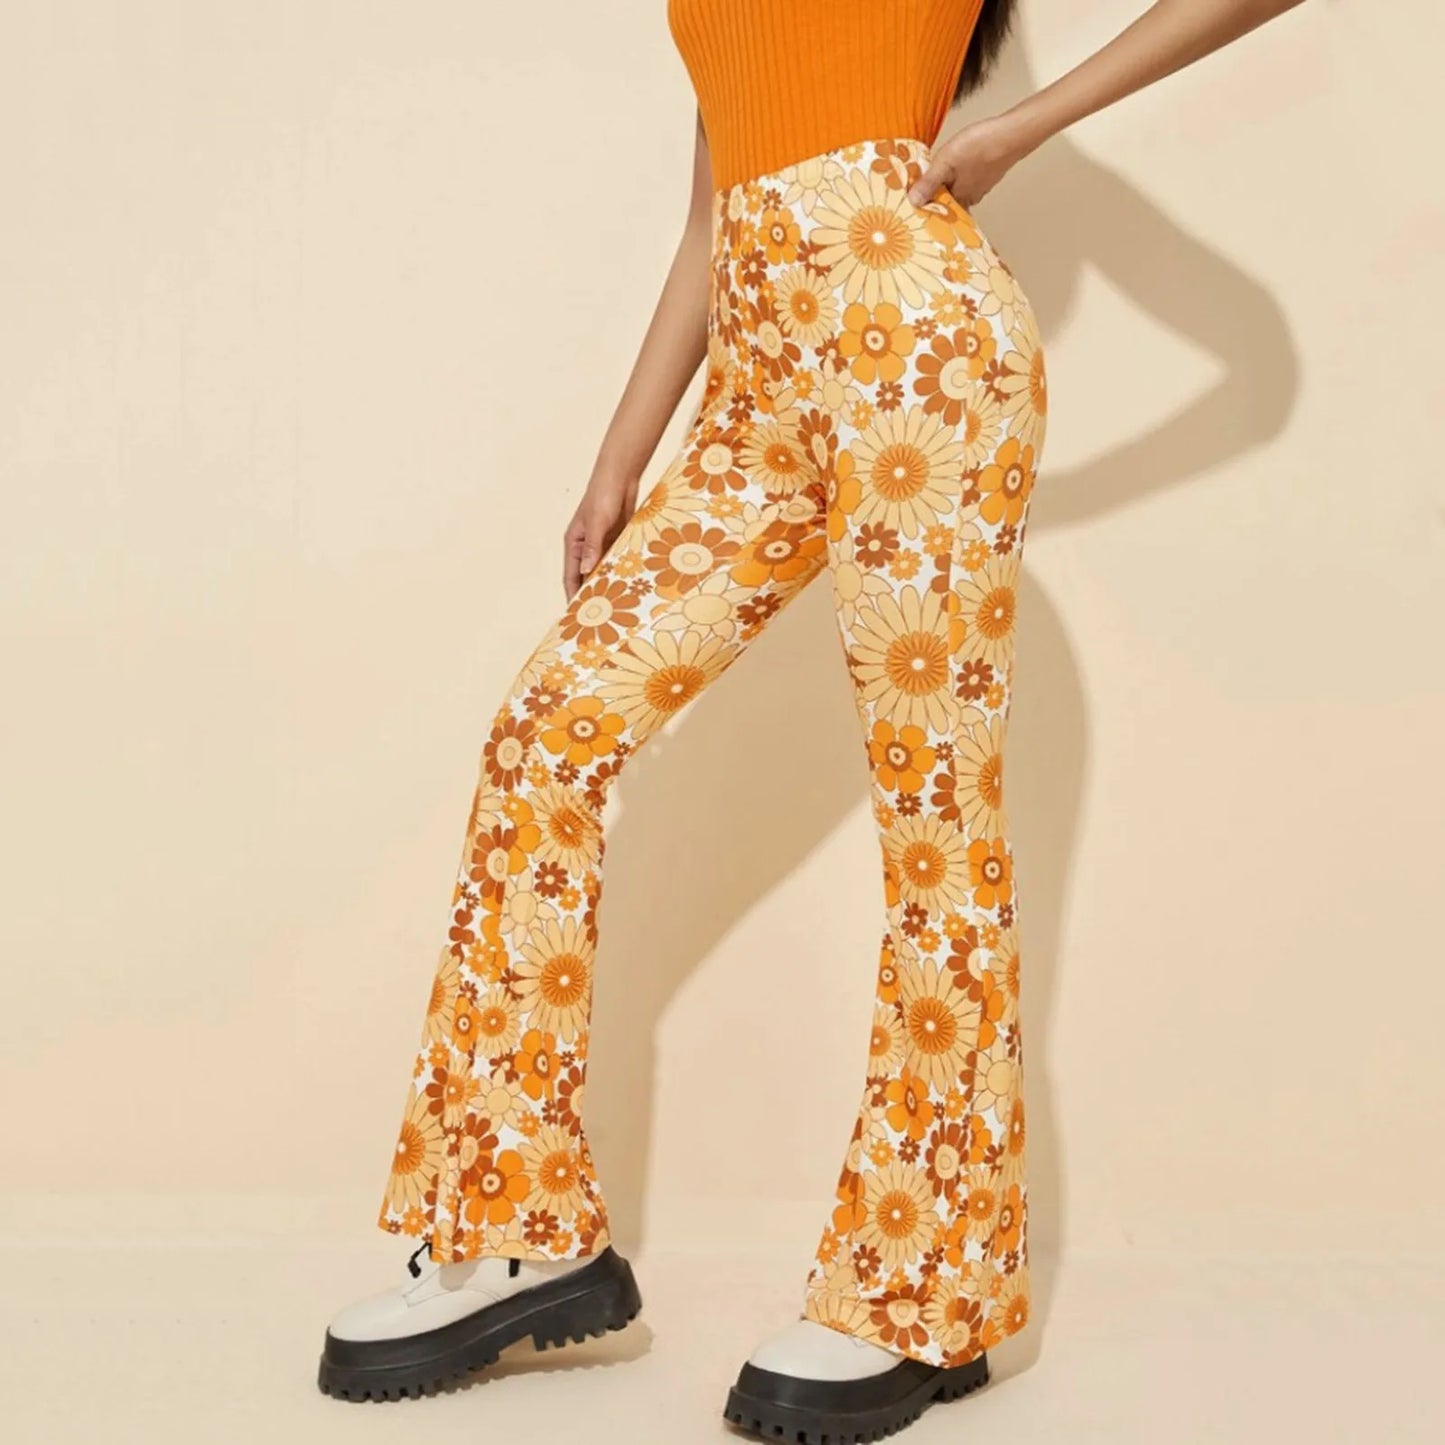 70's Wallpaper Floral Print Flared Trousers - Orange